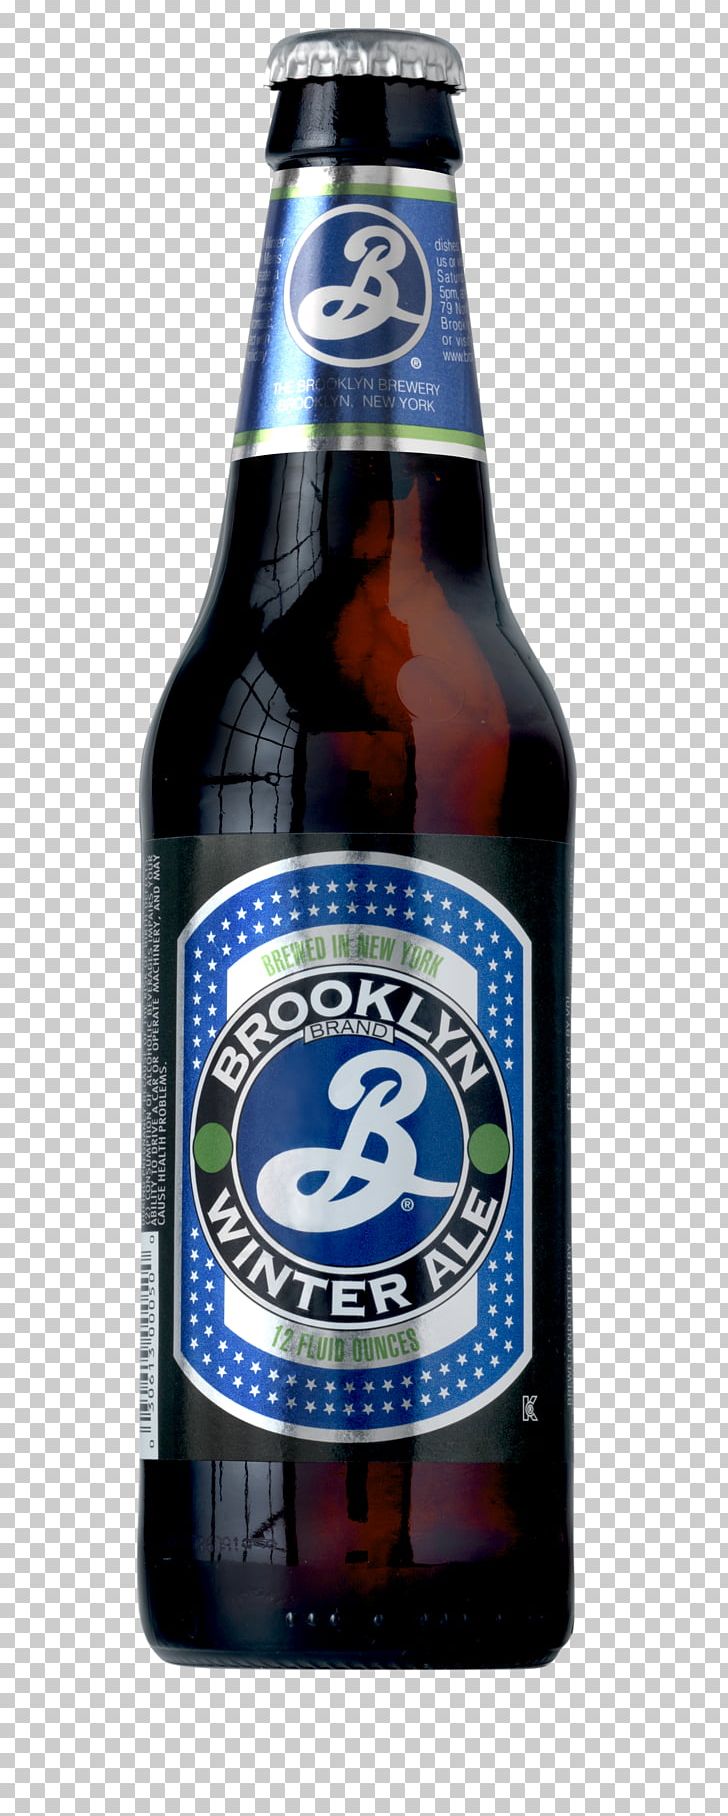 Brooklyn Brewery India Pale Ale Beer PNG, Clipart, Alcoholic Beverage, Ale, Beer, Beer Bottle, Bottle Free PNG Download